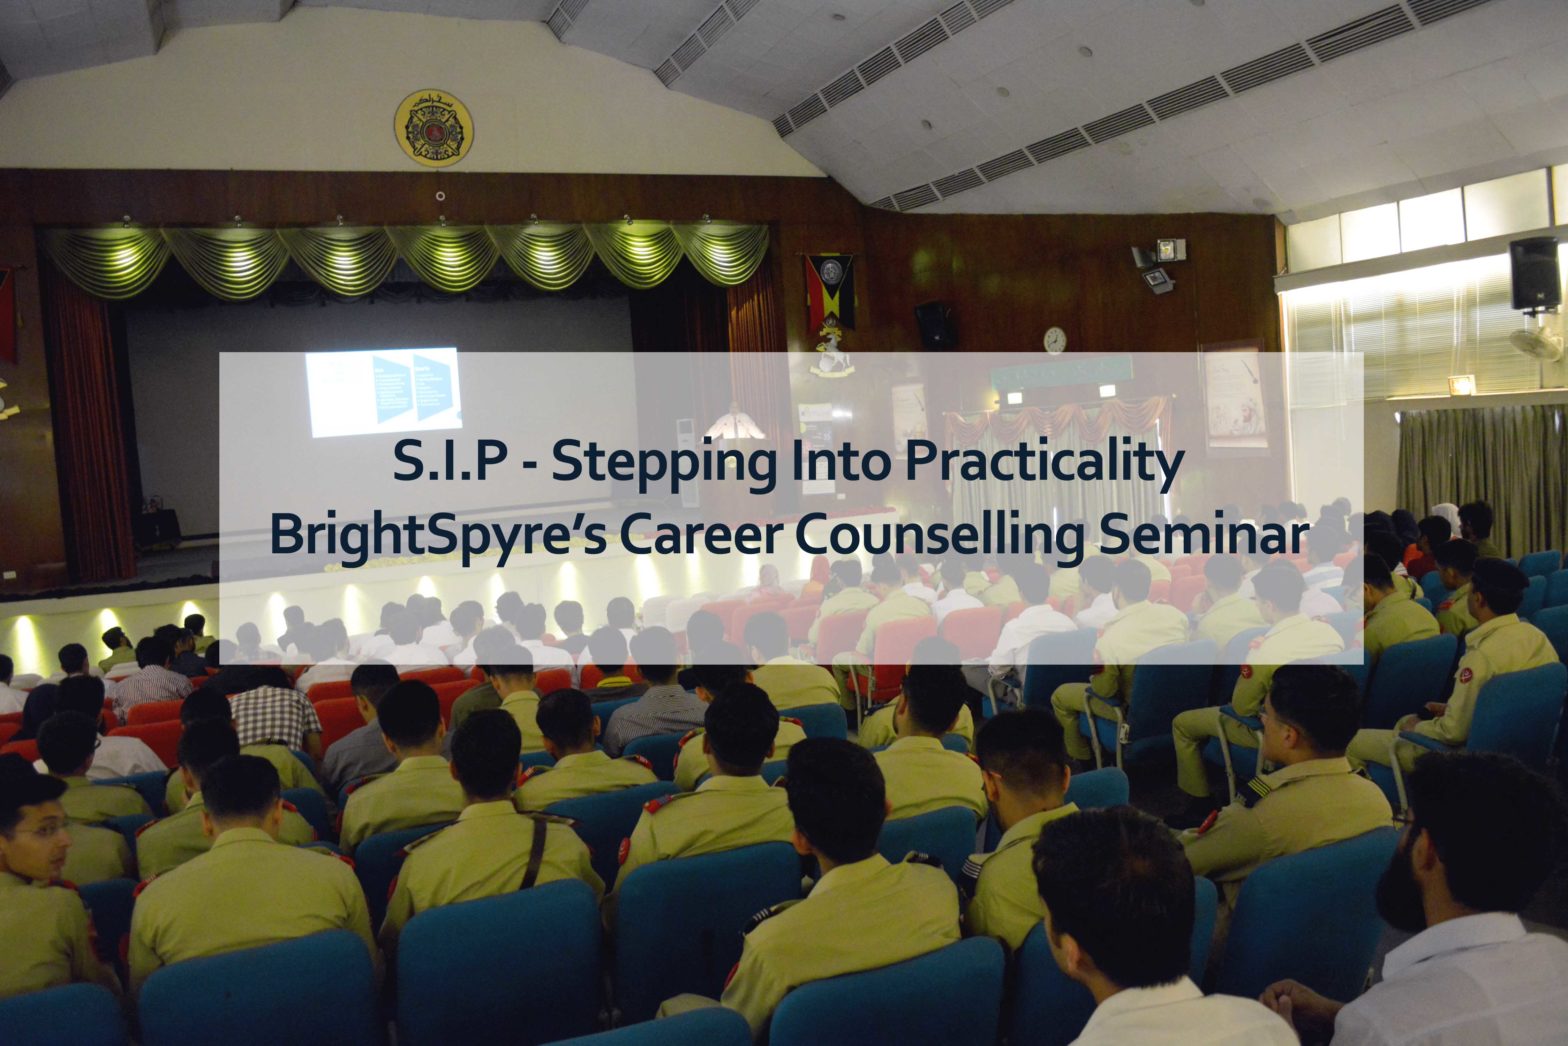 Career Counselling Seminar at NUST by BrightSpyre